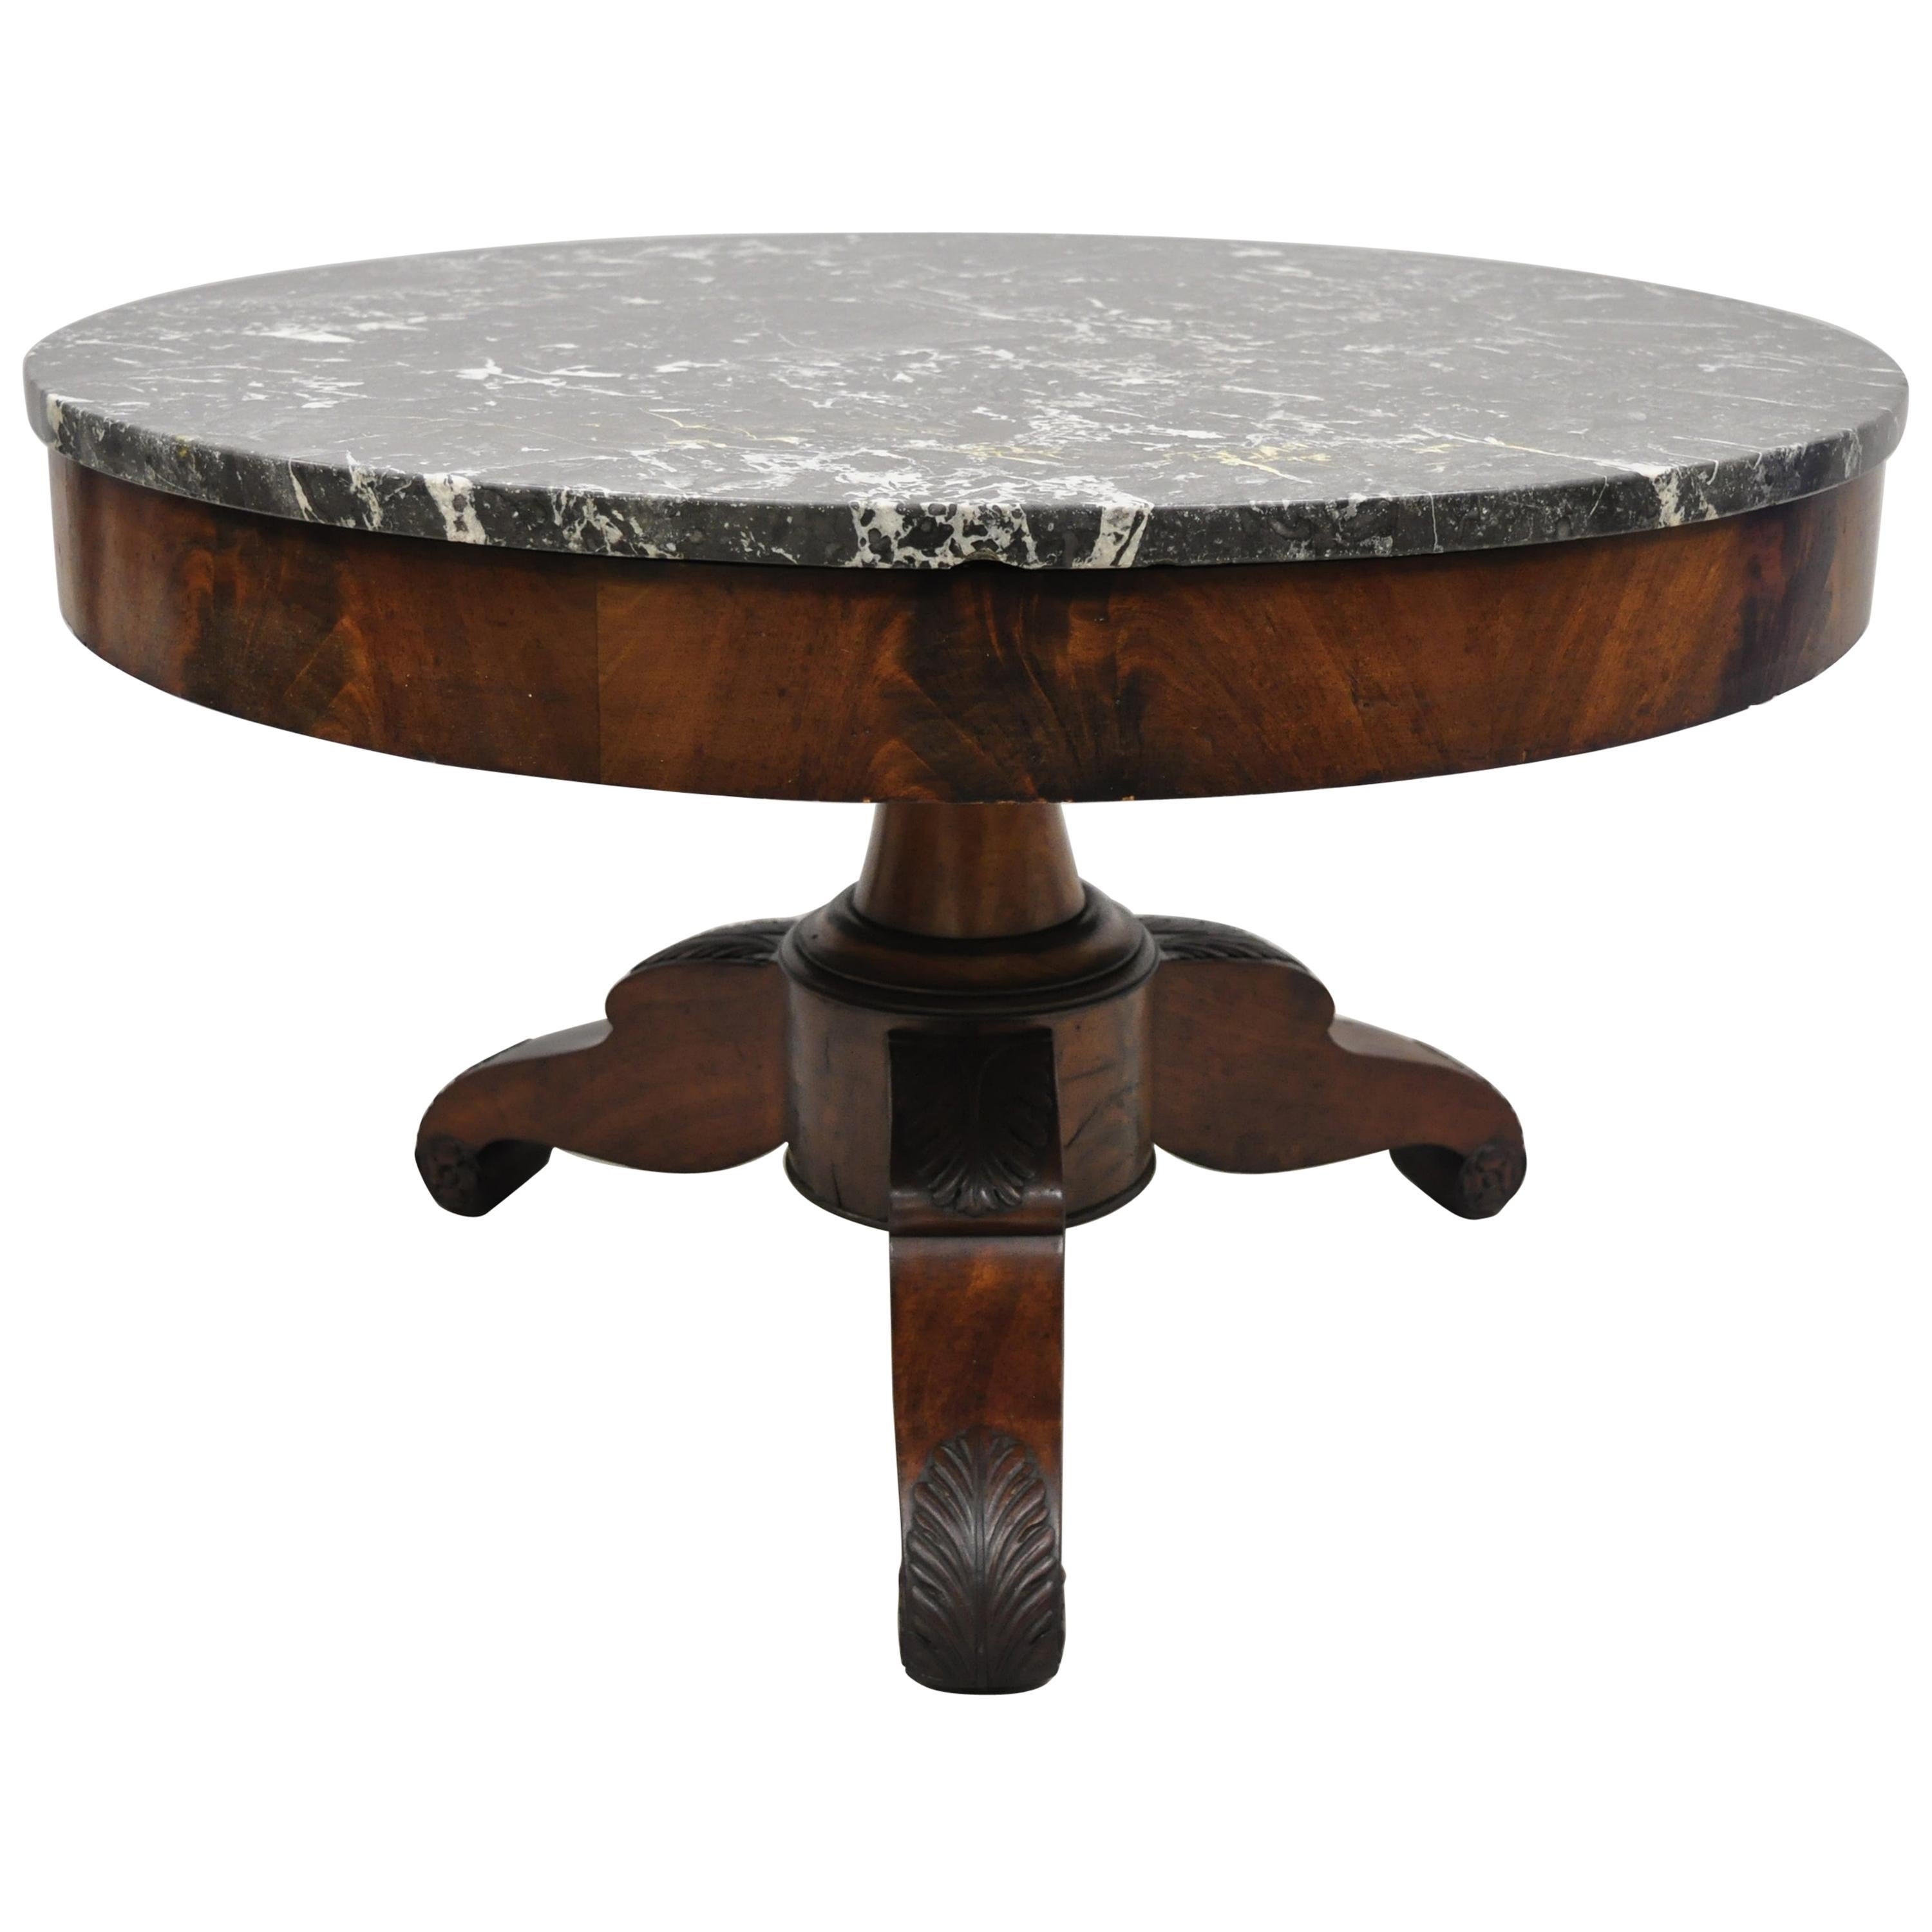 American Empire Round Marble-Top Flame Mahogany Pedestal Base Coffee Table